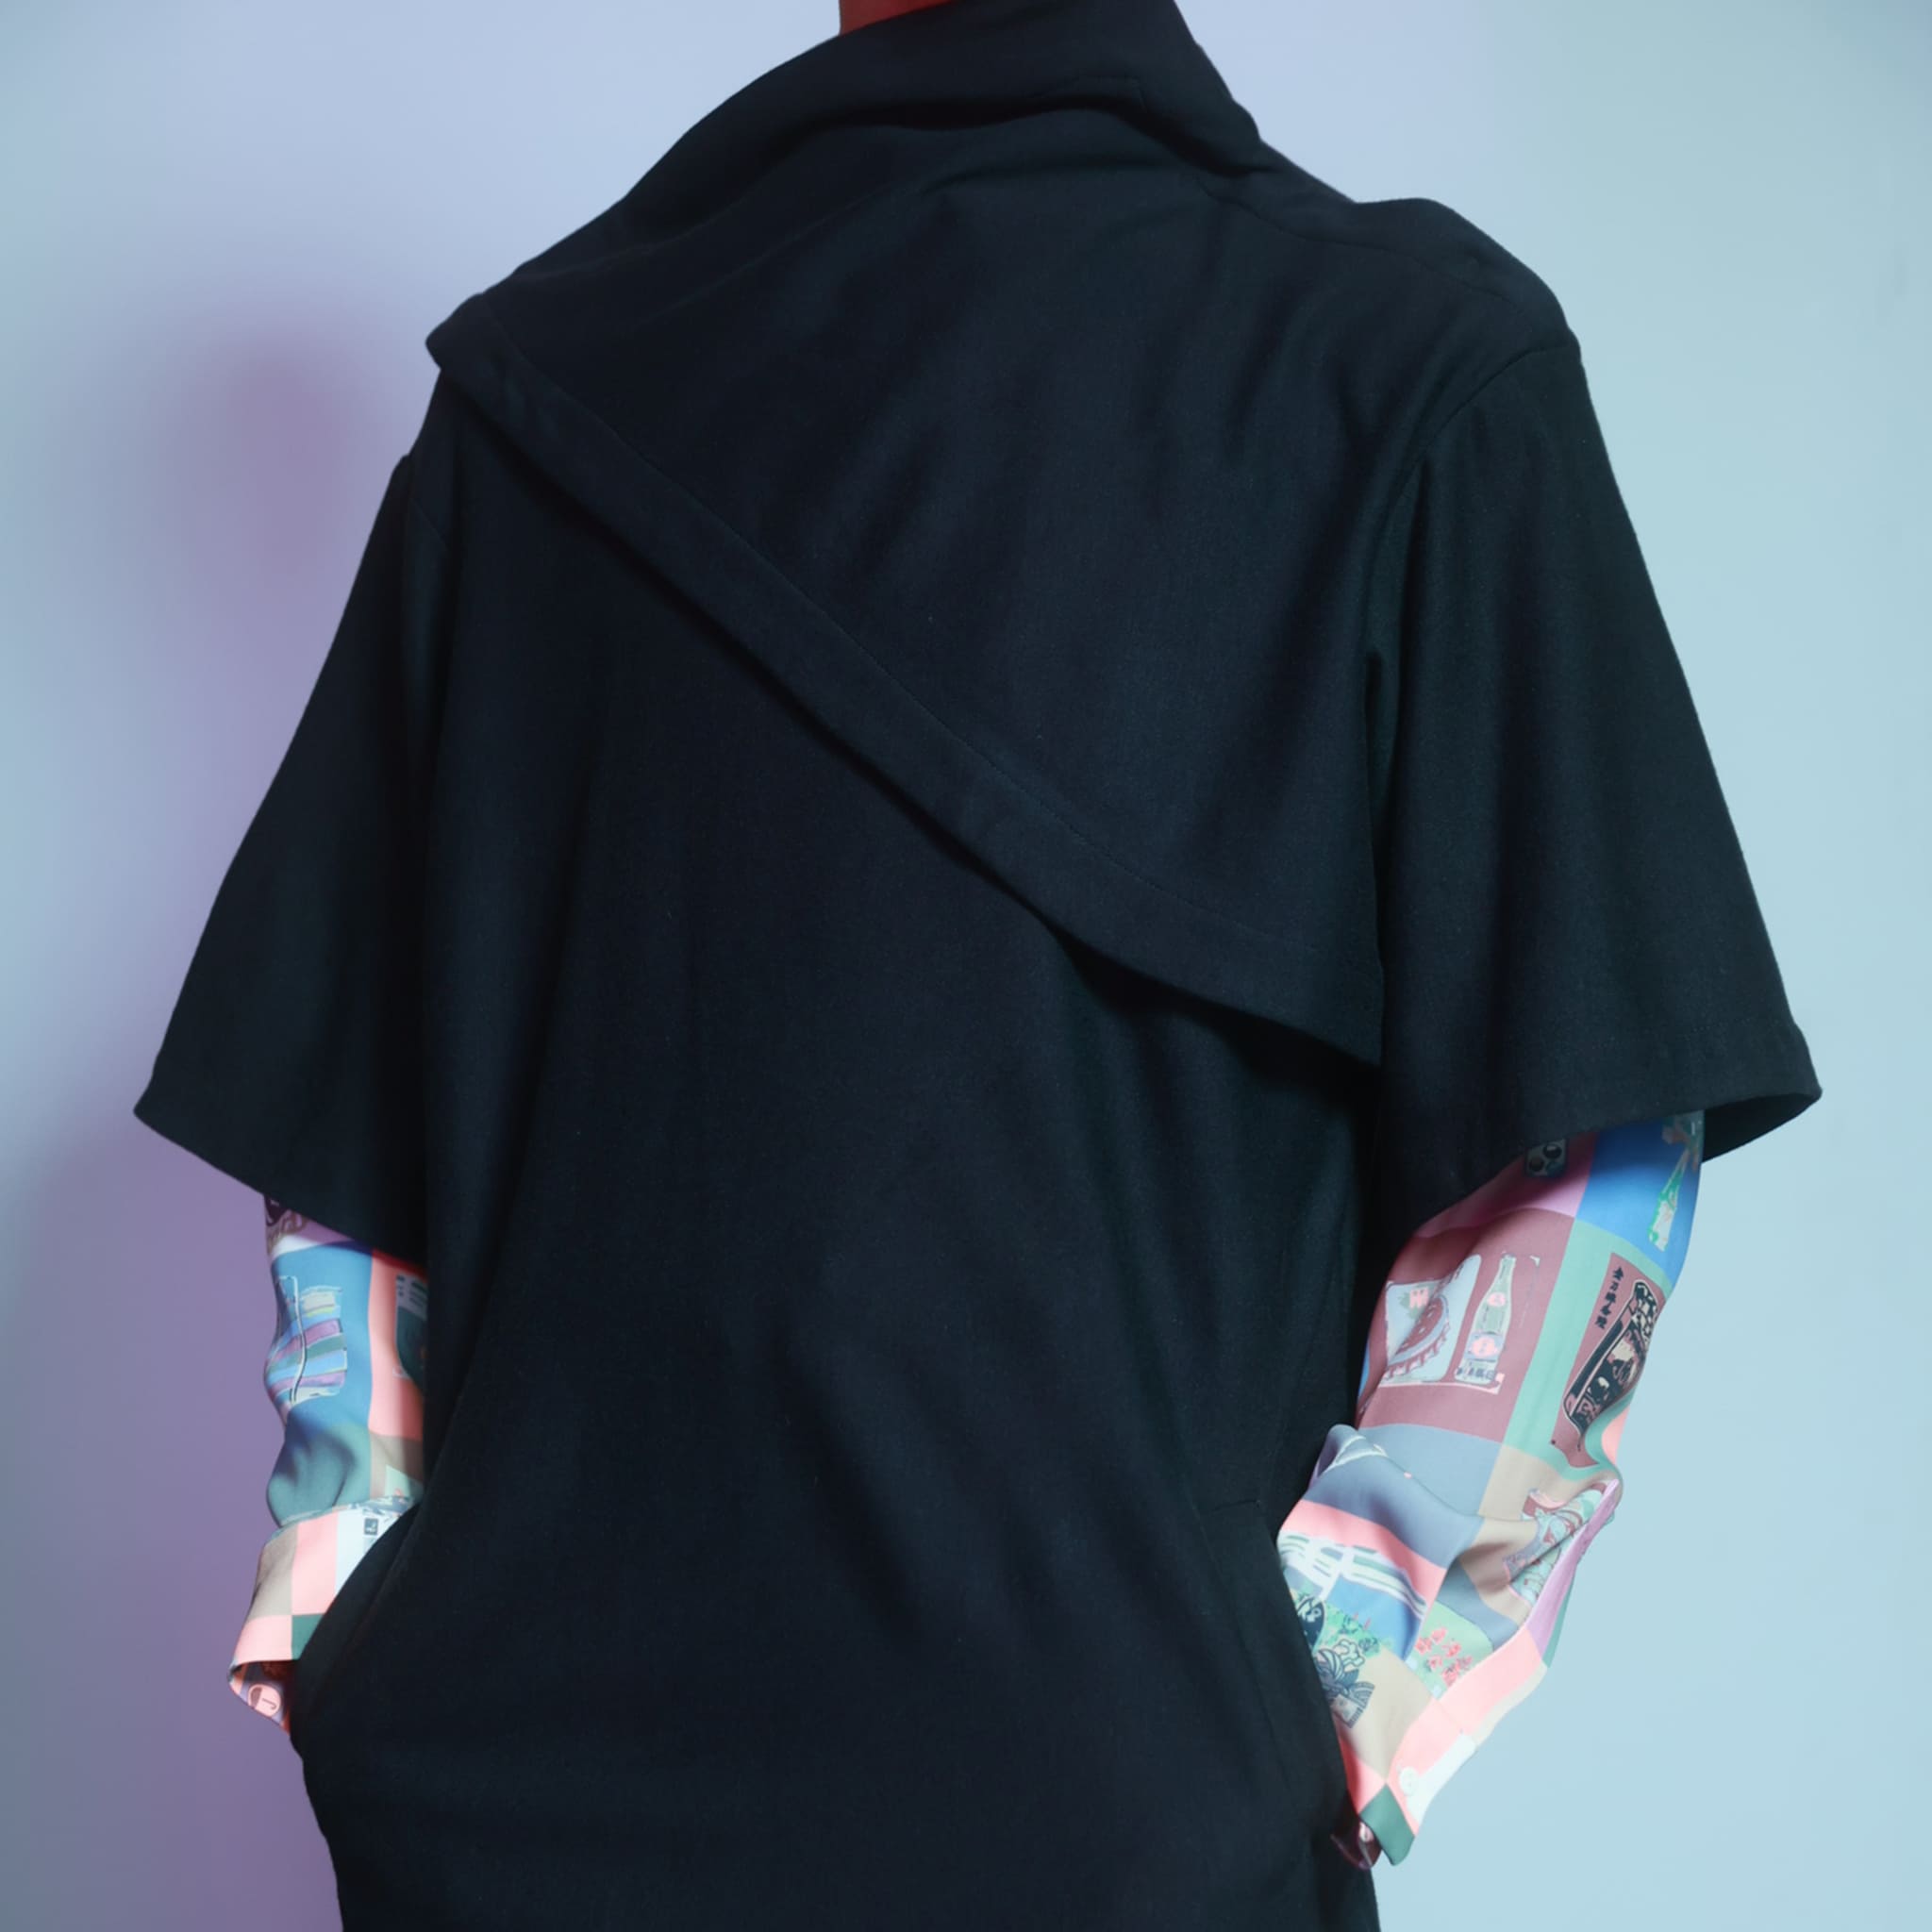 Hollow Neck Layers Top